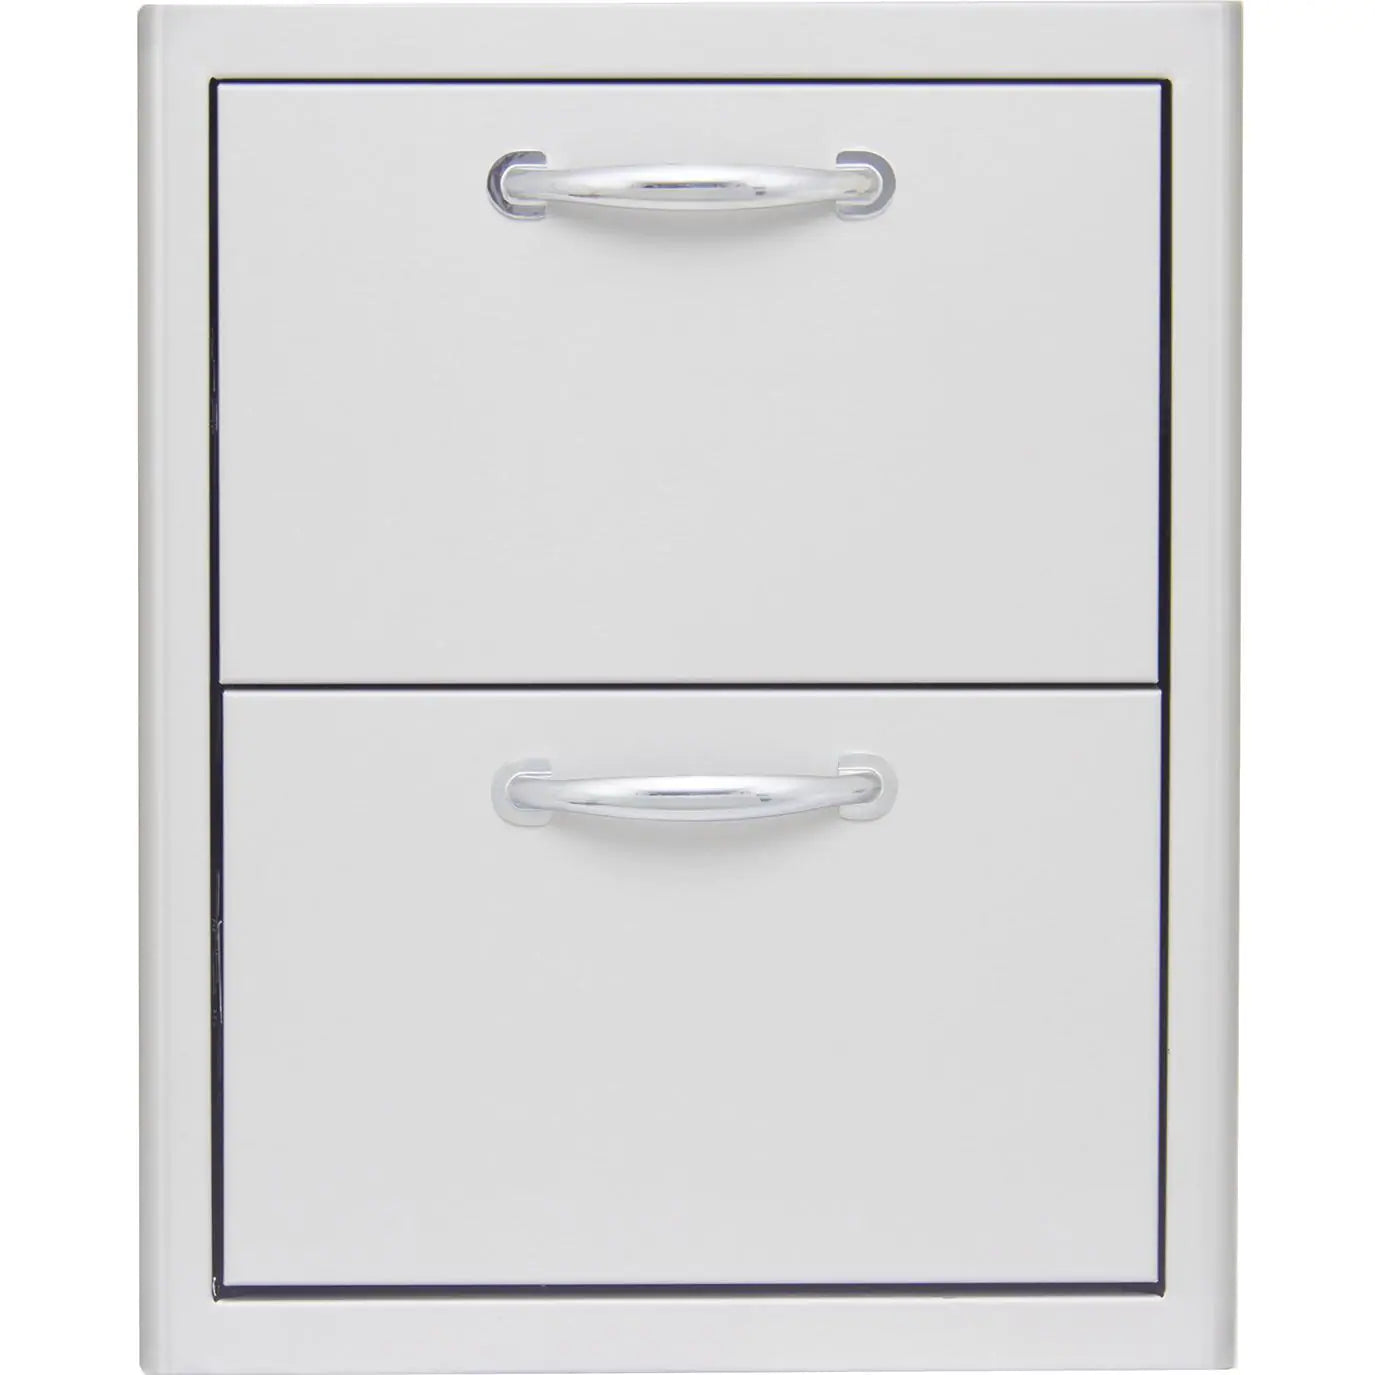 Blaze 16-Inch Double Access Drawer